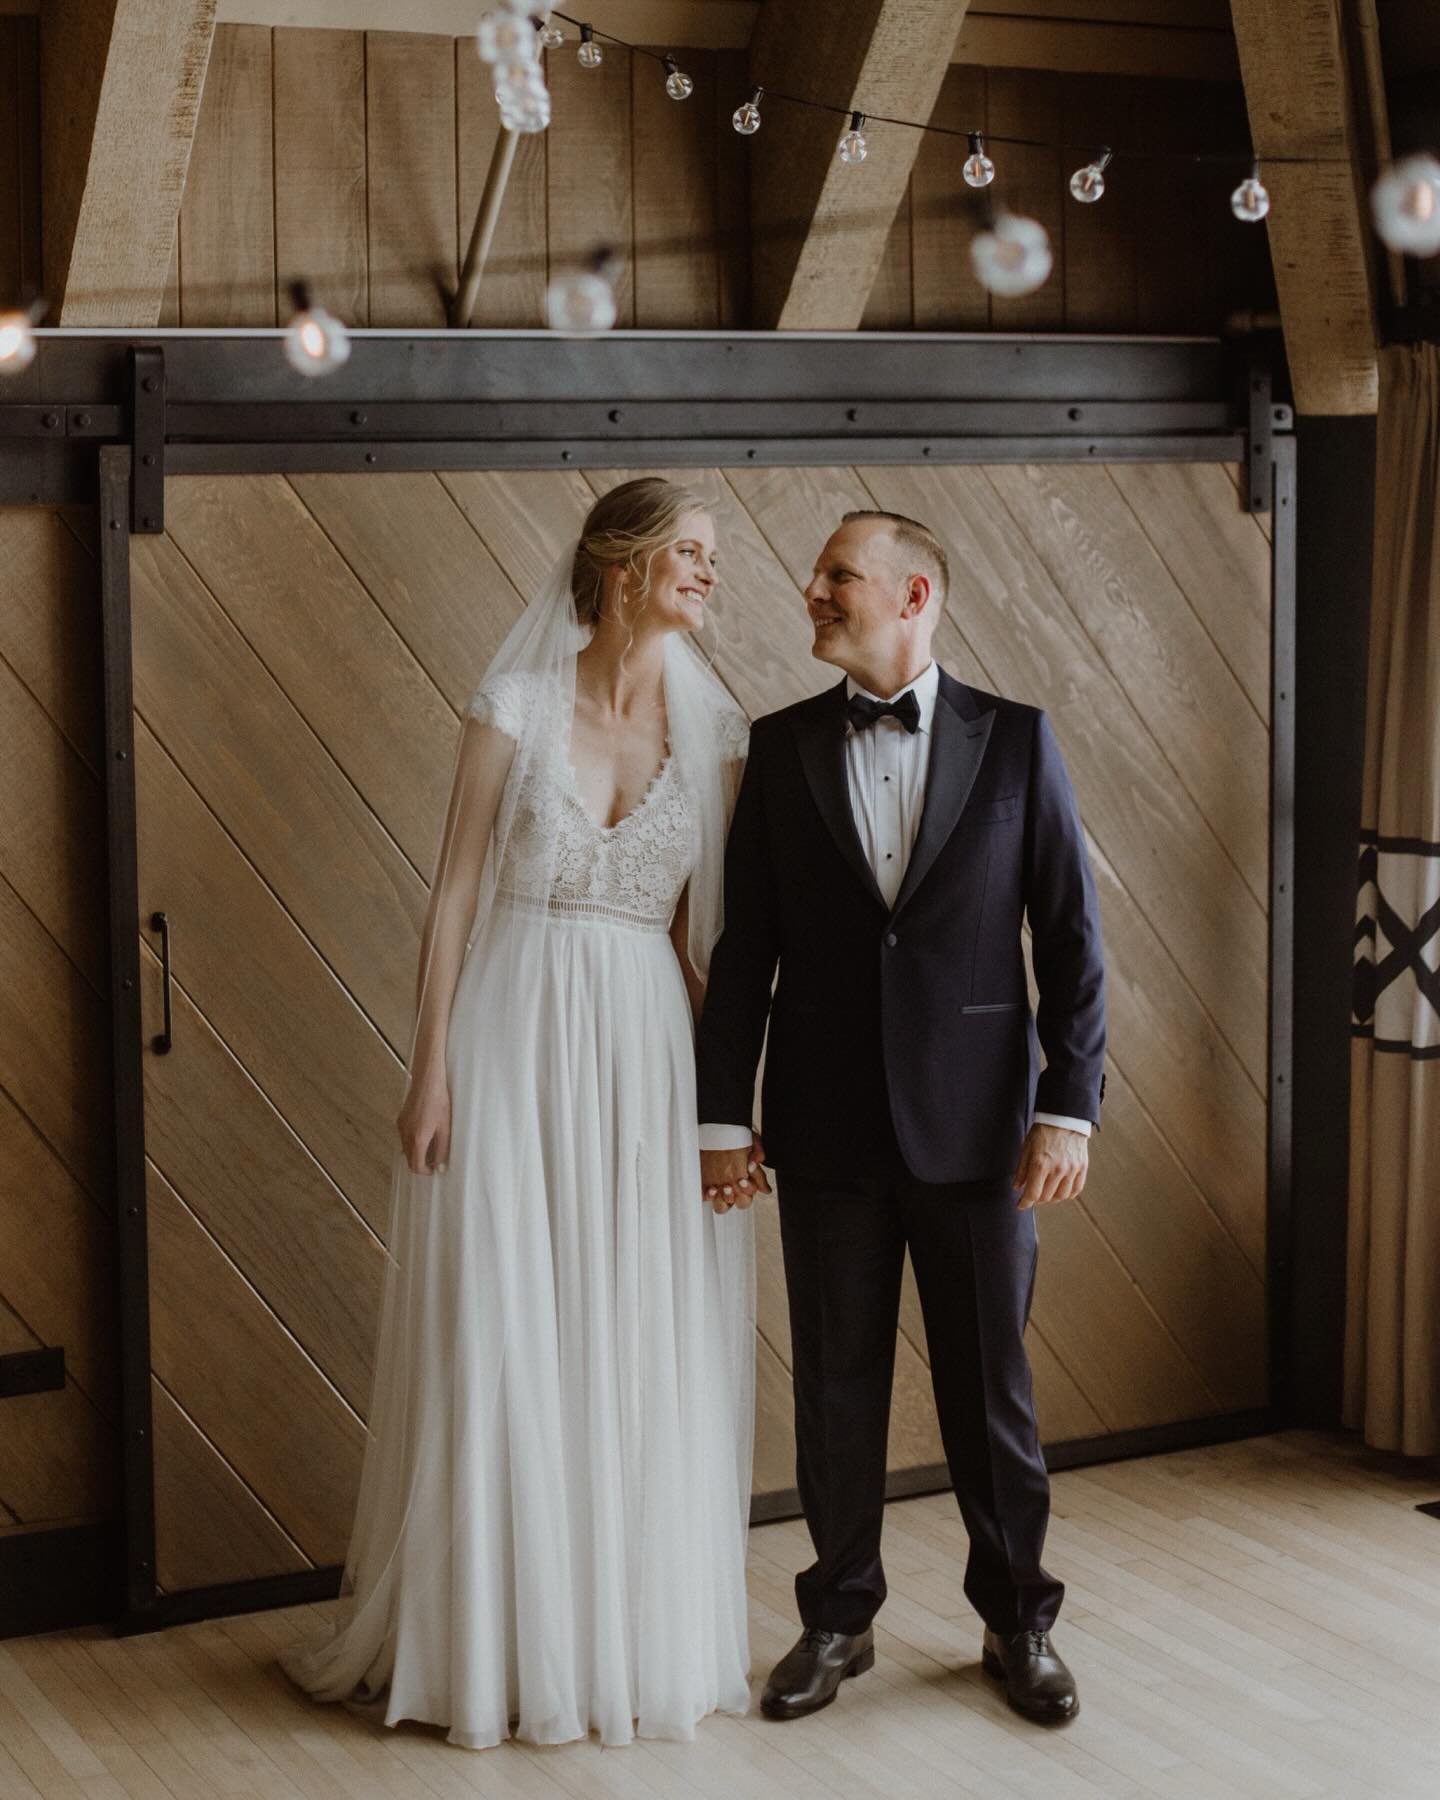 3/3 Congrats to the Augustines on your first year married - may the rest be as memorable and amazing as you both!
.
Ravens Nest @timberlinelodge 
HMU @artistrybymai 
Photo @lilysandhornsphoto